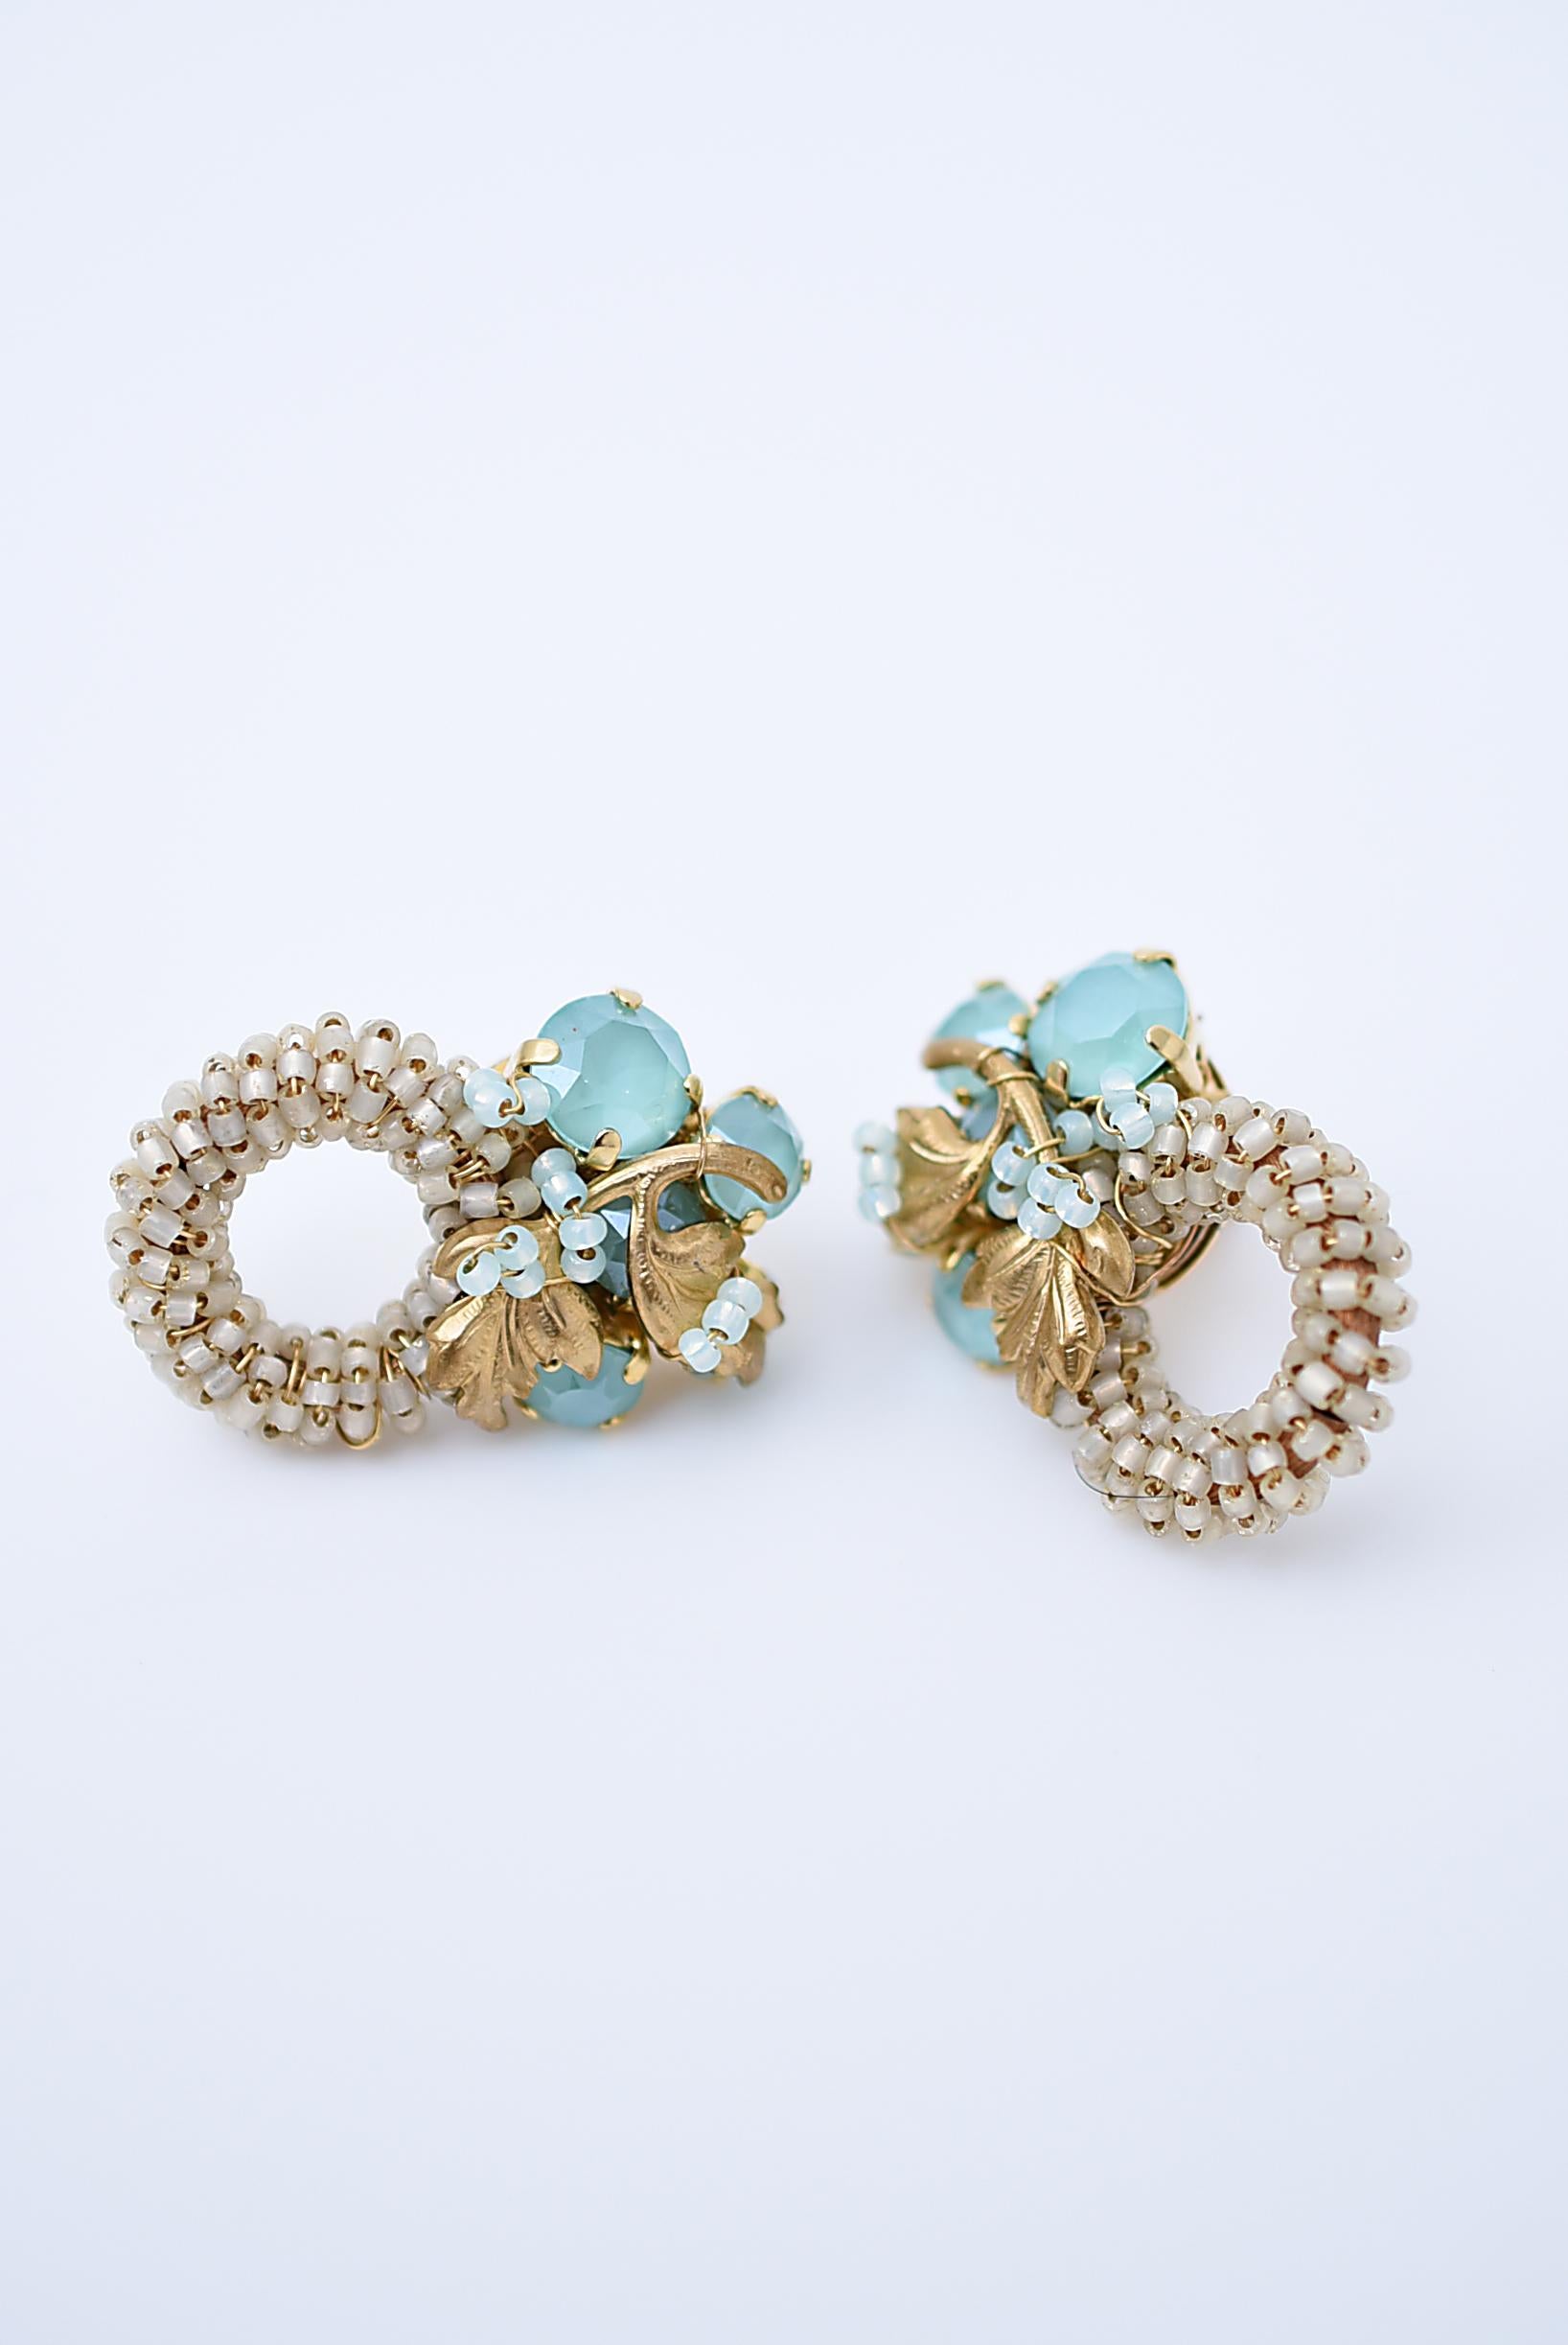 material:1970’s American vintage parts,glass beads,brass,swarovski,stainless
size:length 3.5cm

It's like wearing a bouquet.
It sits snugly on your ear and does not sway.
The many fresh mint green Swarovski crystals on the earrings sparkle in the